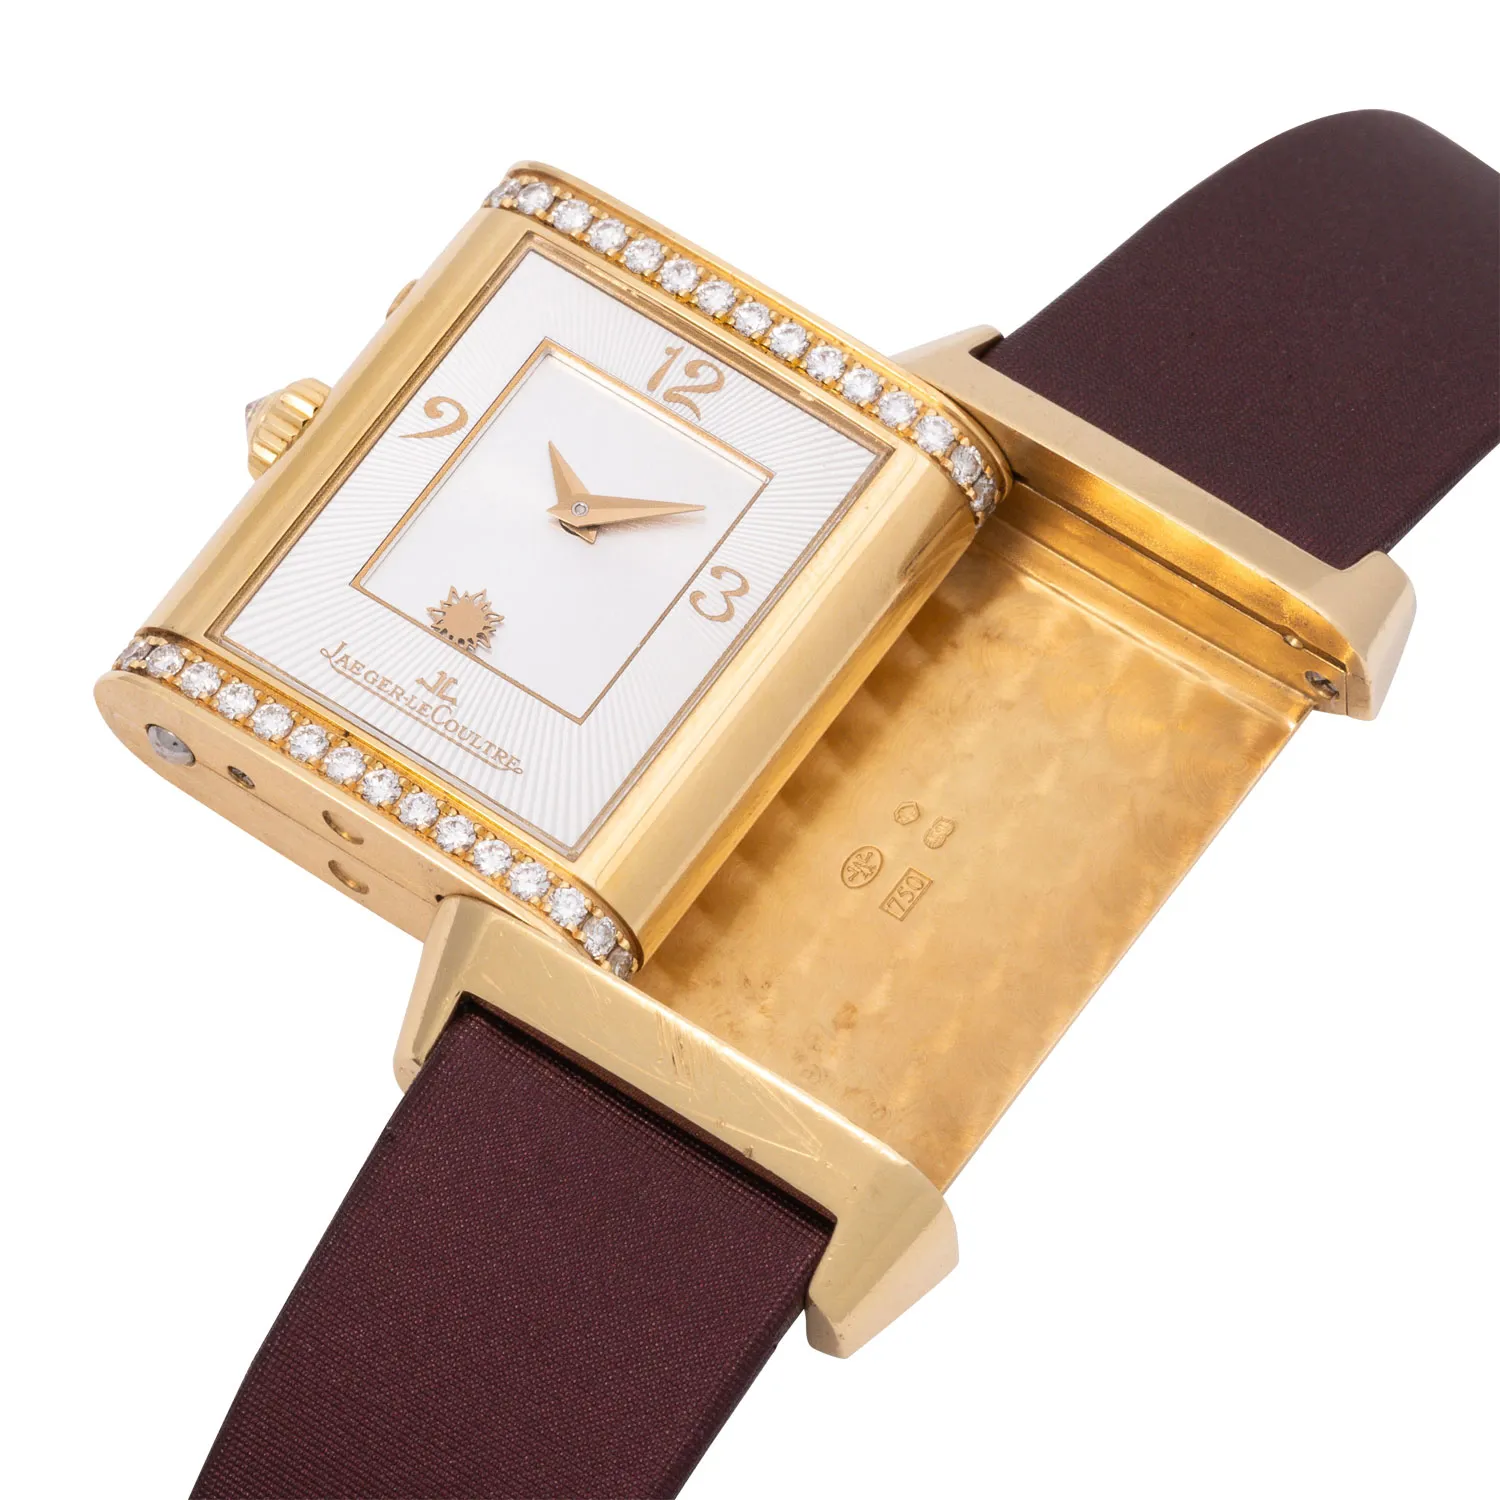 Jaeger-LeCoultre Reverso Duetto Duo 26.1.54 25mm Yellow gold and diamond-set 5